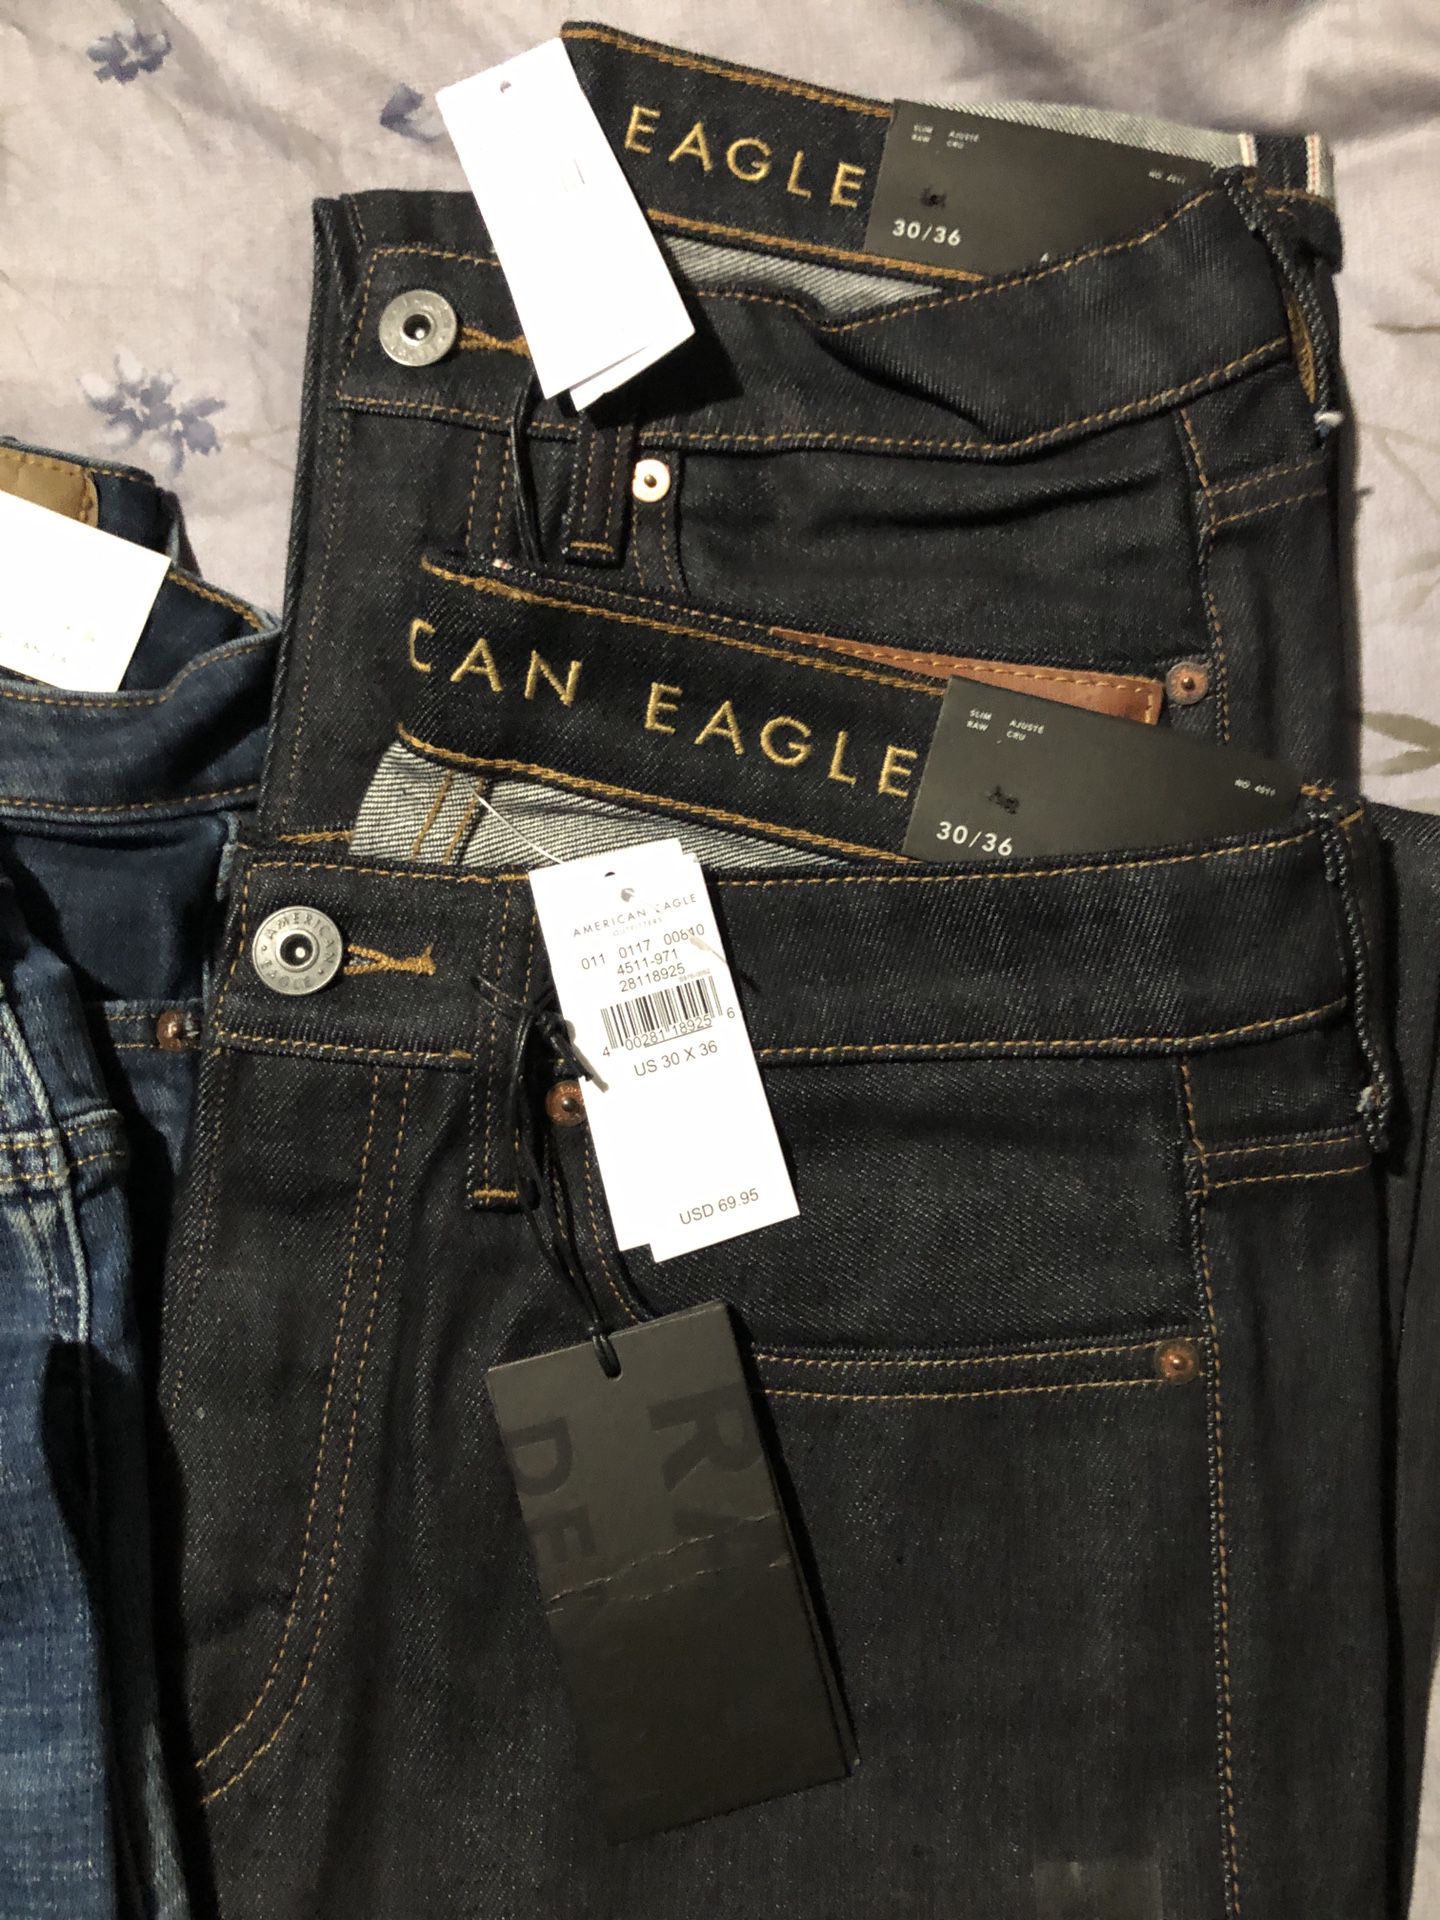 American Eagle Jeans New With Tags 30X36 Sale in Houston, TX OfferUp